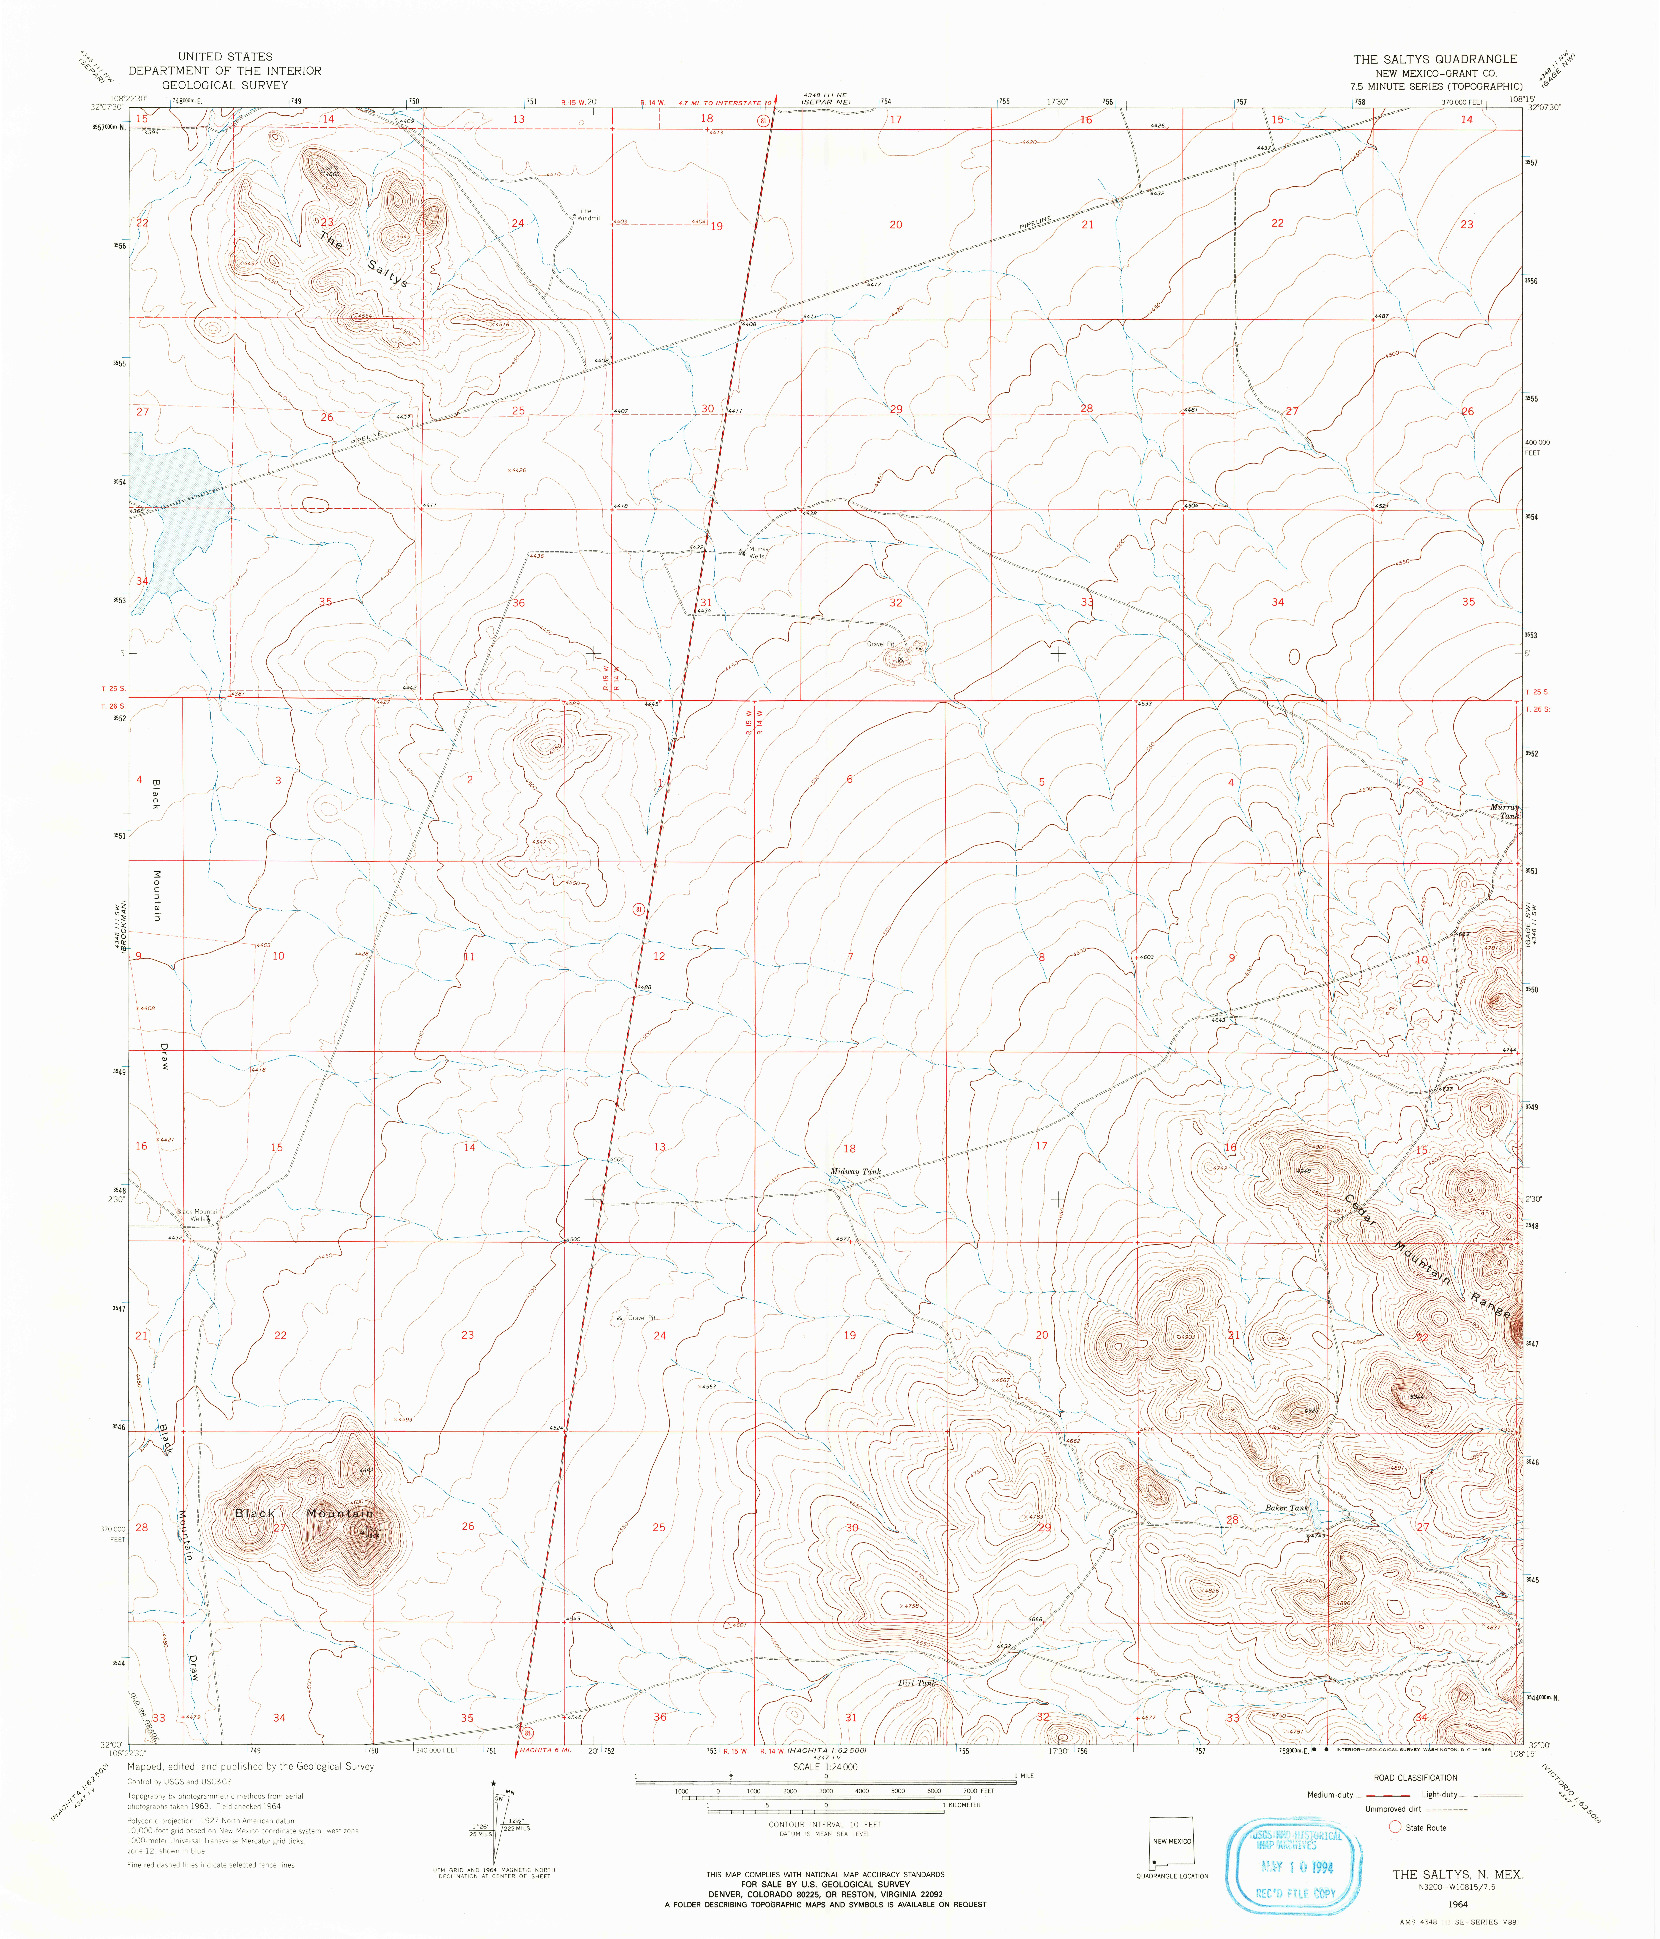 USGS 1:24000-SCALE QUADRANGLE FOR THE SALTYS, NM 1964